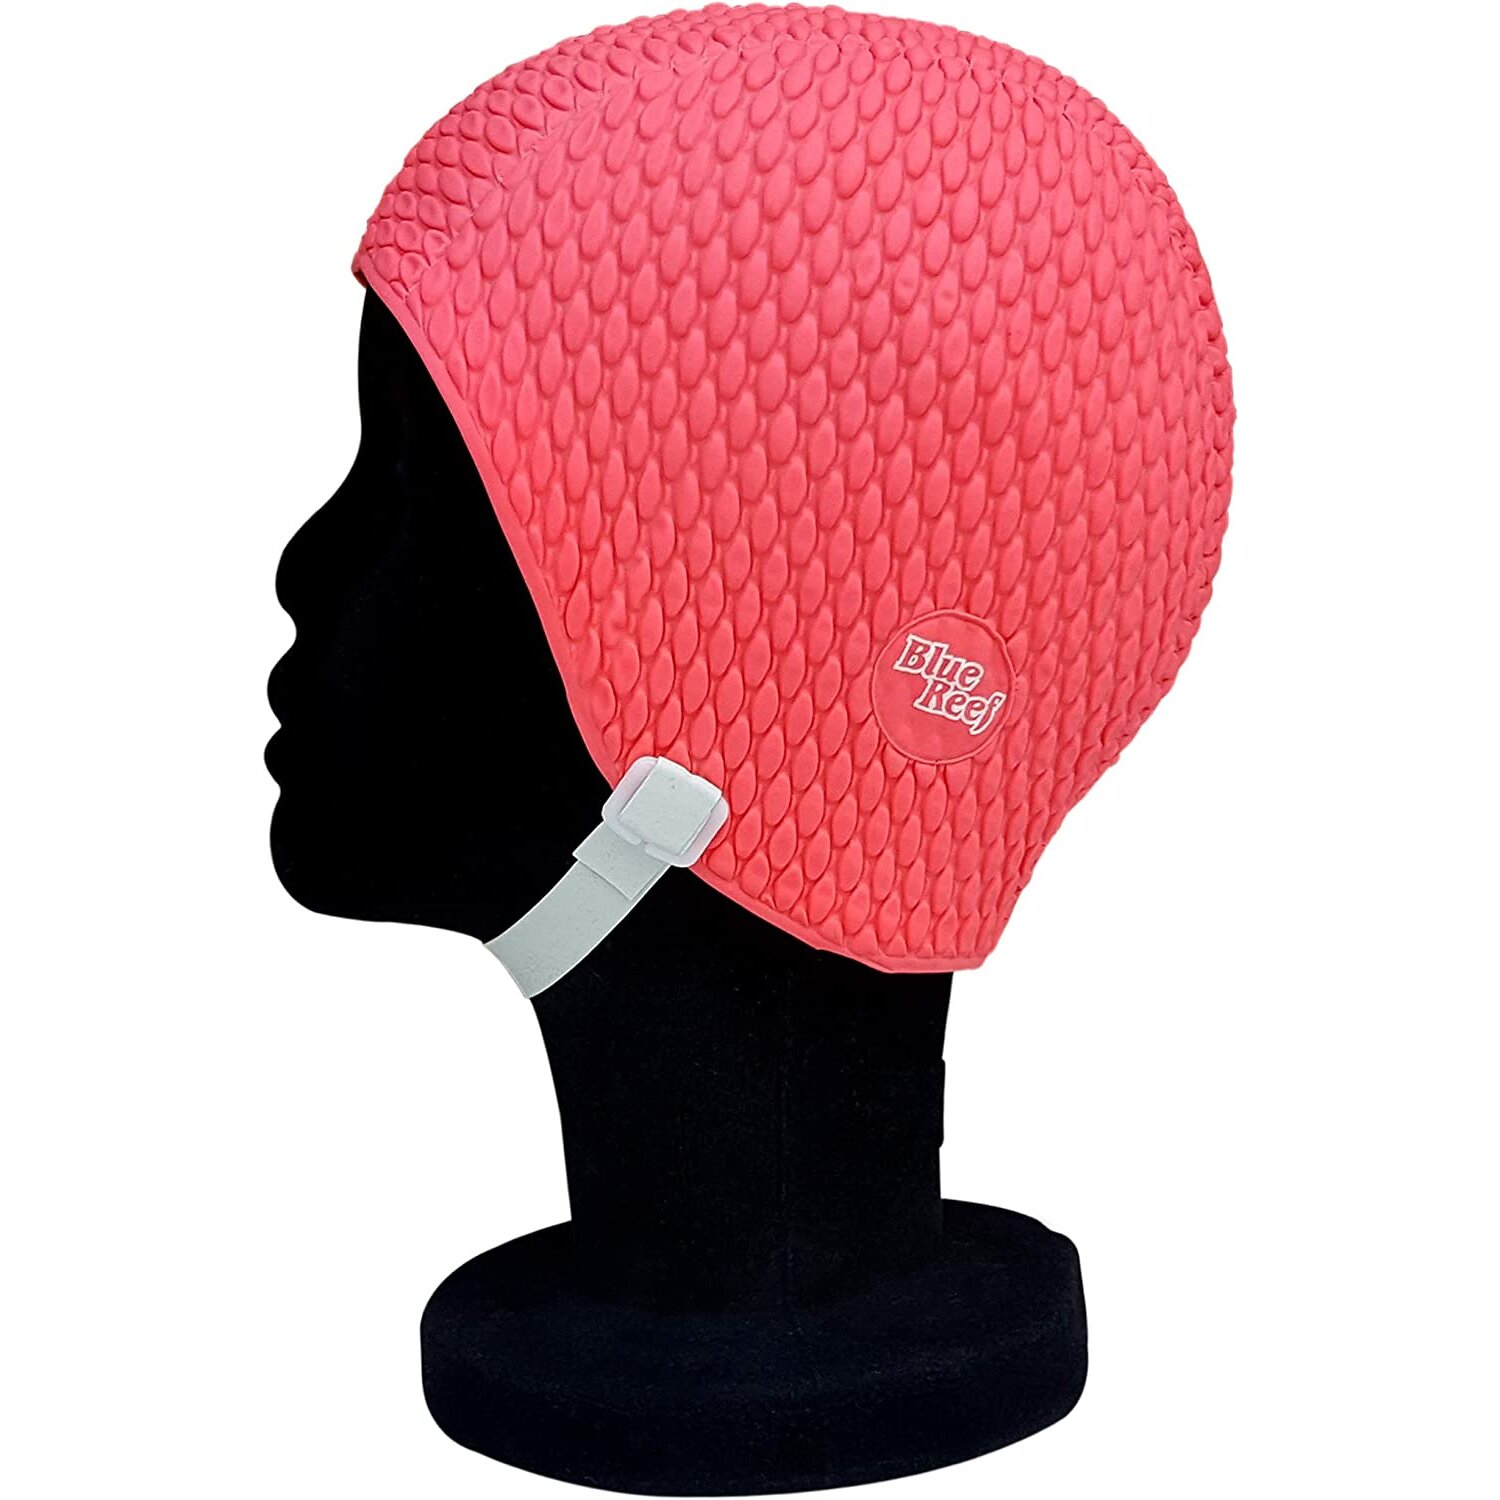 Blue Reef Bubble Pimple Effect Single Solid Colour Ladies Classic Retro Understated Swimming Hat Swim Cap One Size Adults With Adjustable Strap